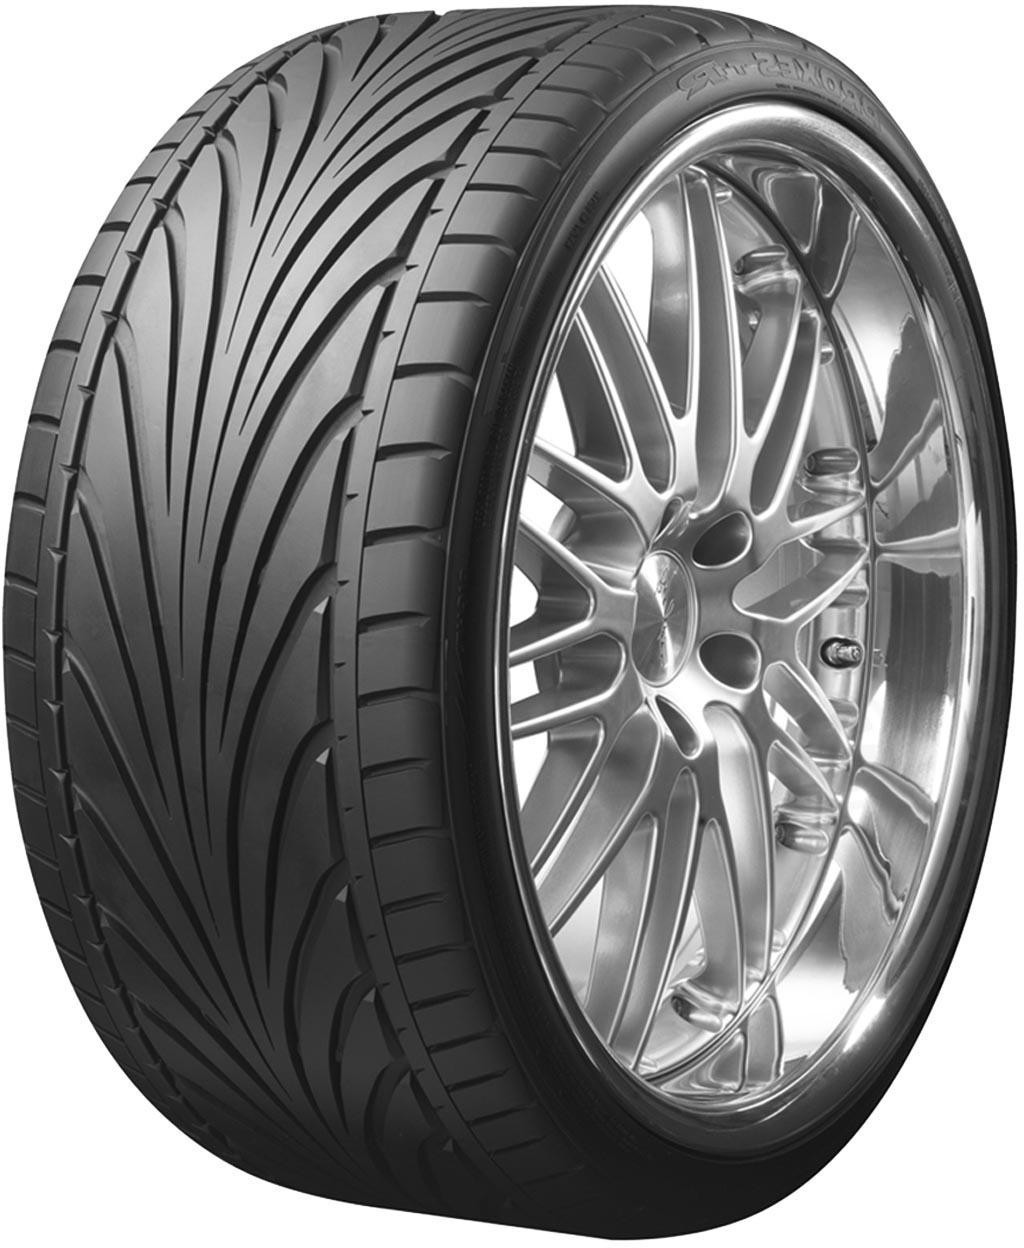 Toyo Proxes T1-R 225/40 R14 82V